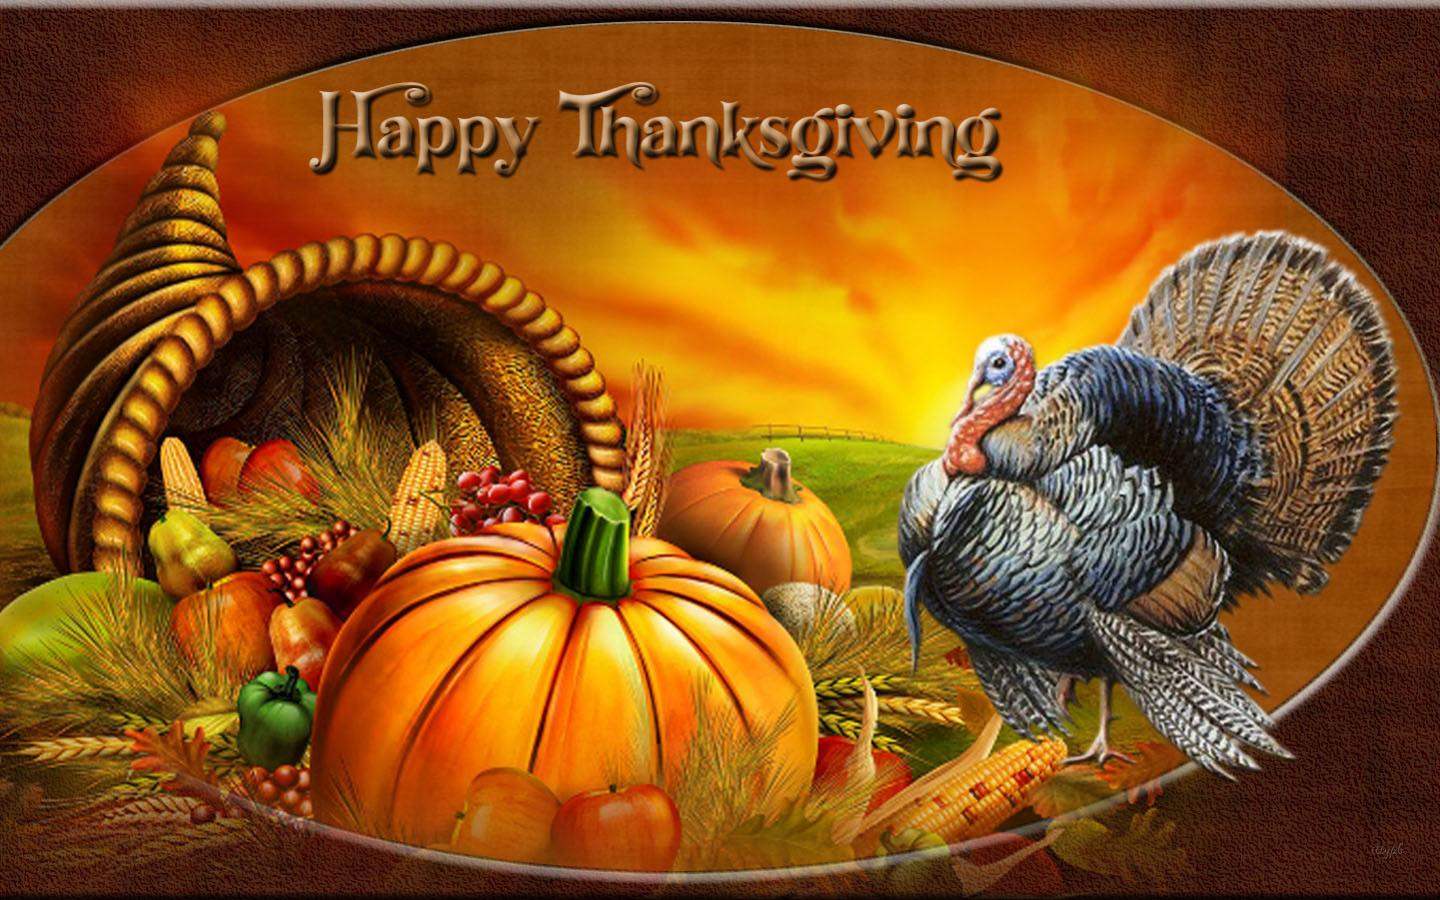 Happy Thanksgiving Wallpaper Full HD and Printable Cards